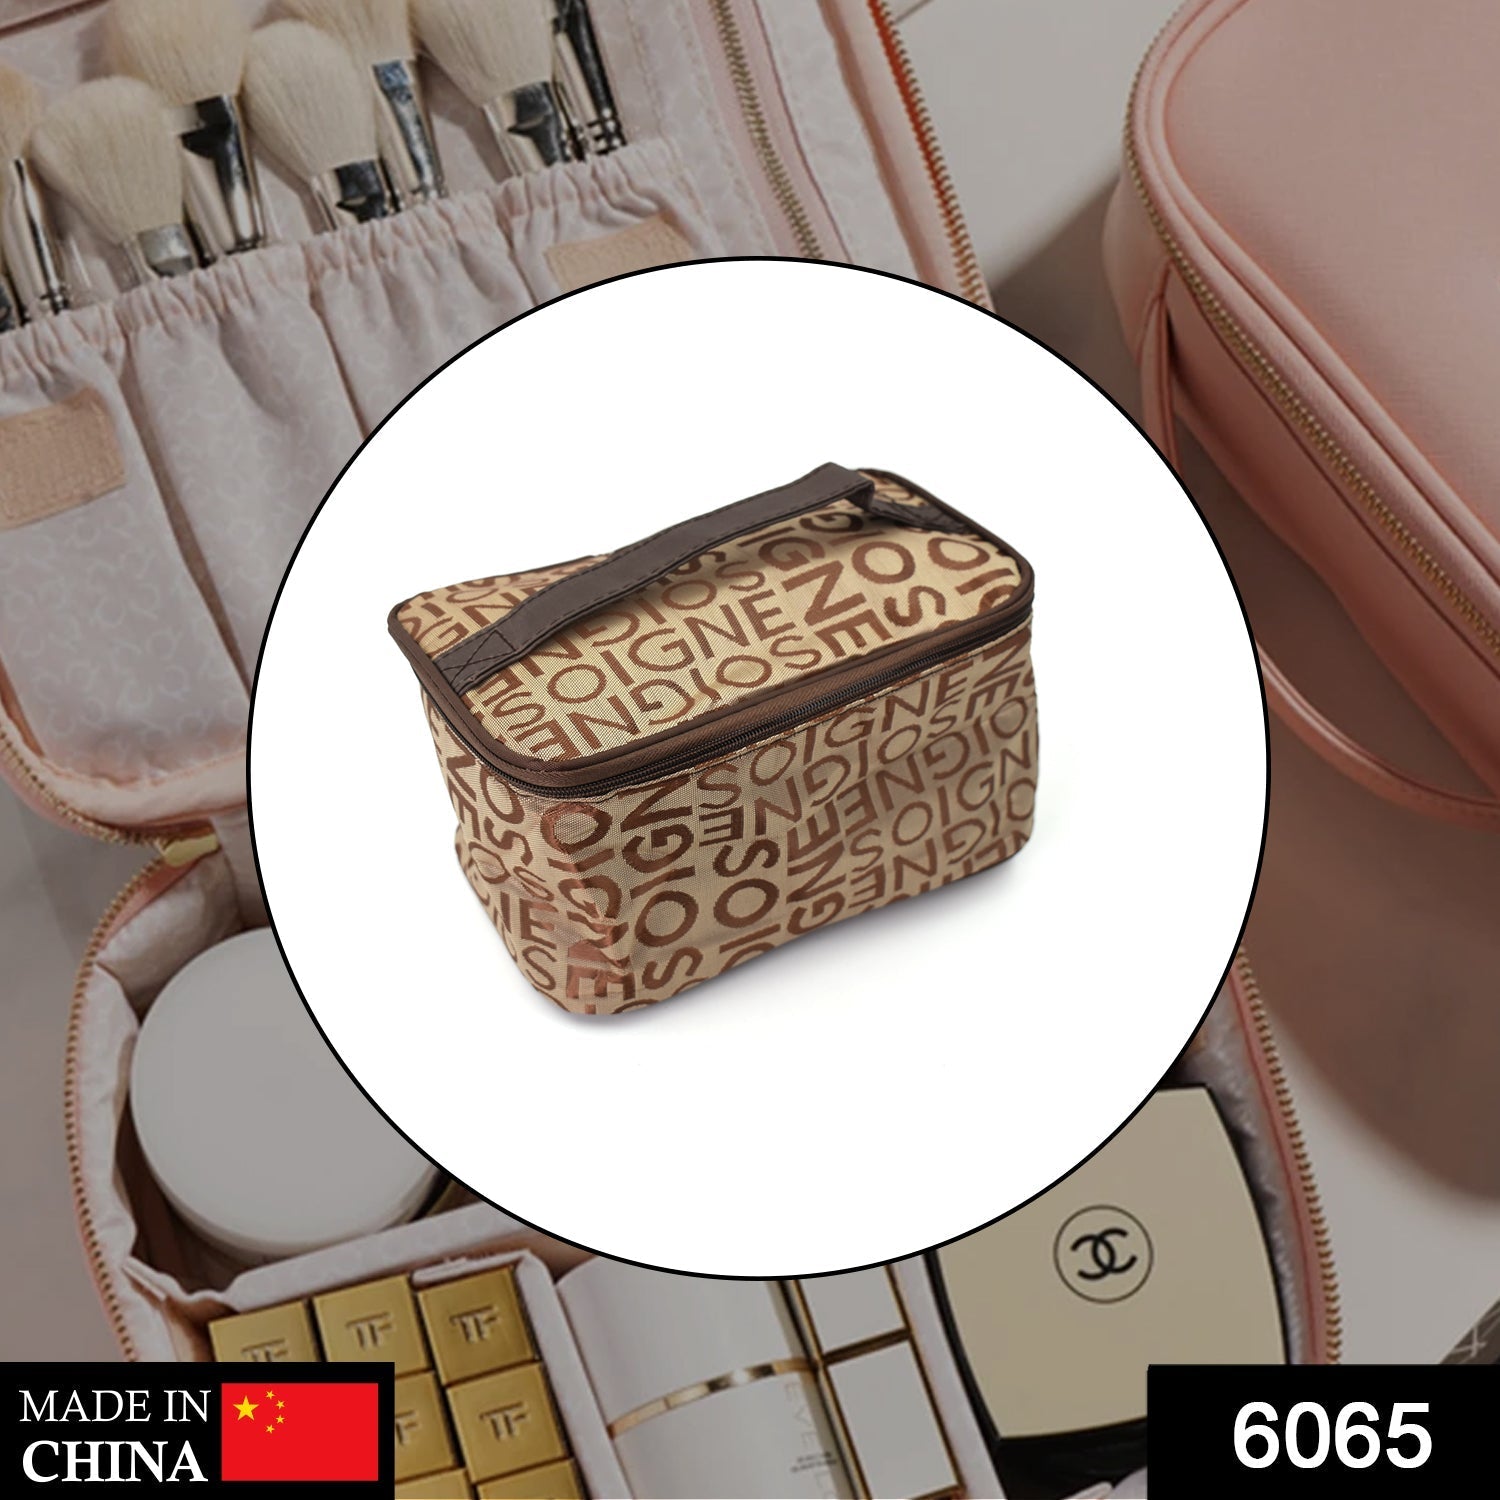 6065 Portable Makeup Bag widely used by women’s for storing their makeup equipment’s and all while travelling and moving. 